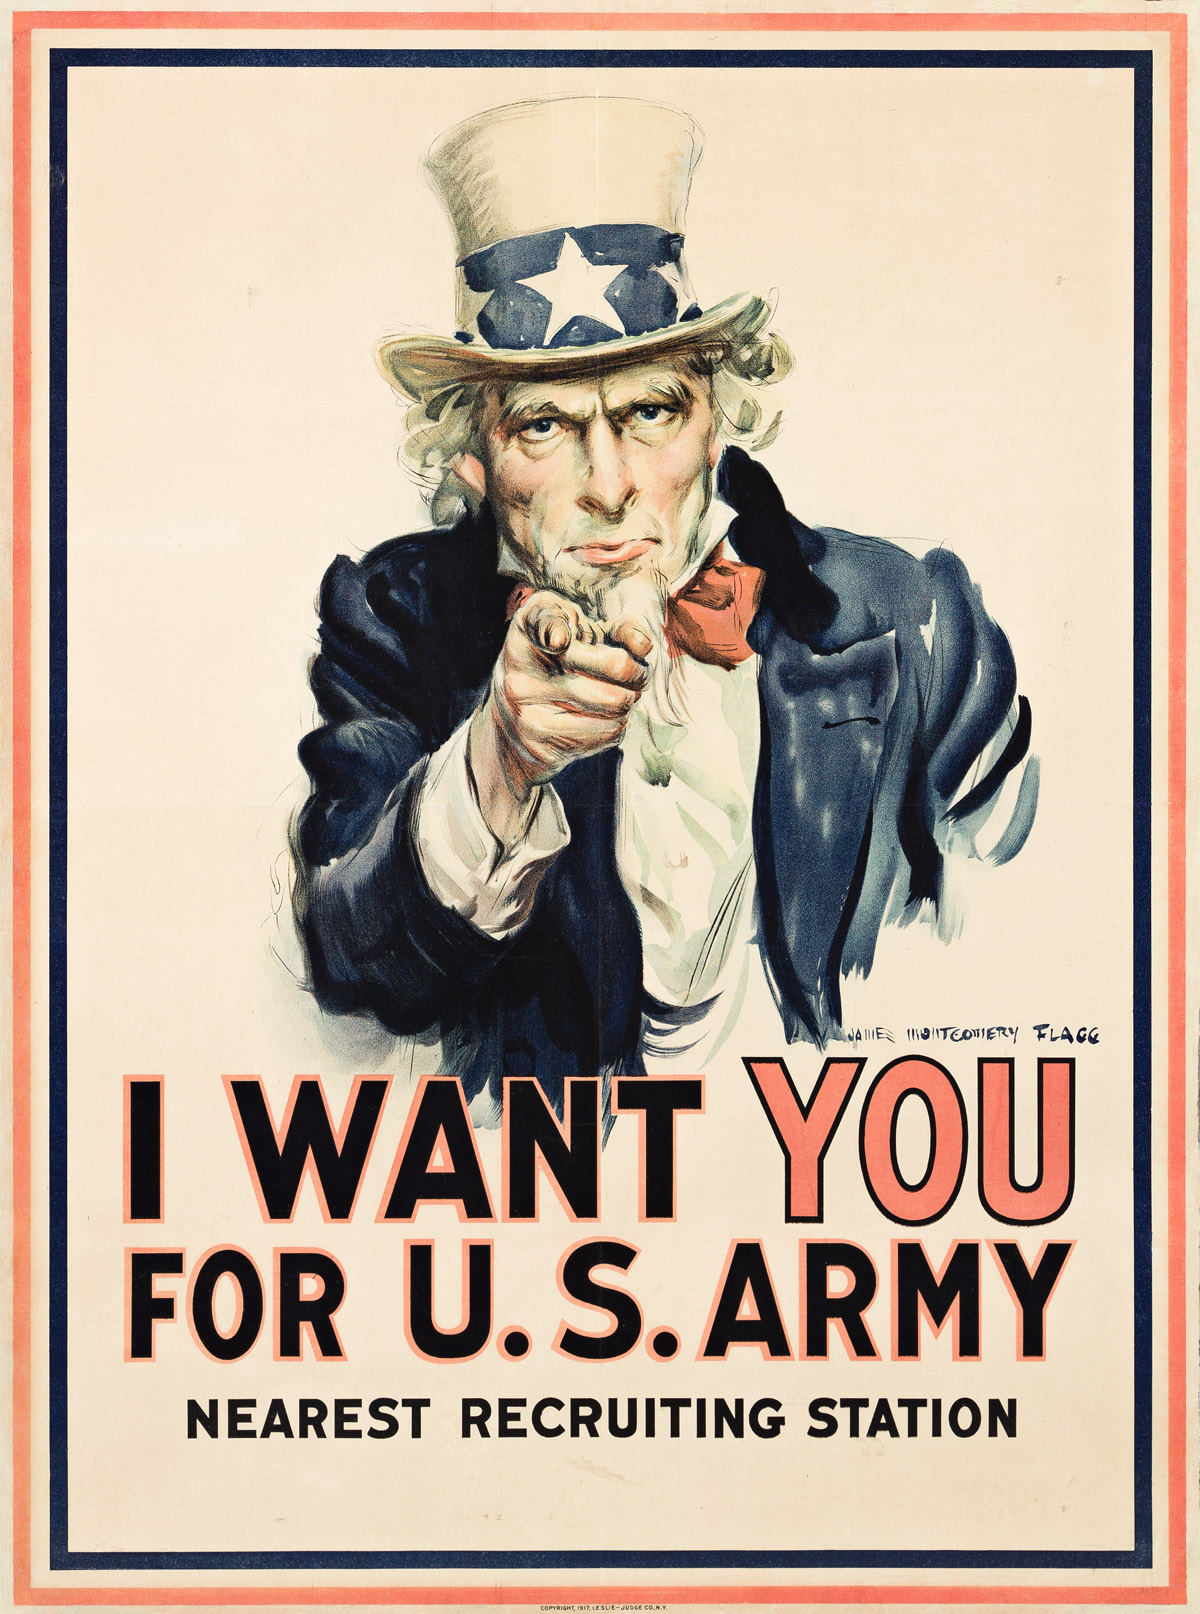 JAMES MONTGOMERY FLAGG (1870-1960).  I WANT YOU FOR U.S. ARMY. 1917. 39½x29¼ inches, 100¼x74¼ cm. Leslie-Judge Co., New York.